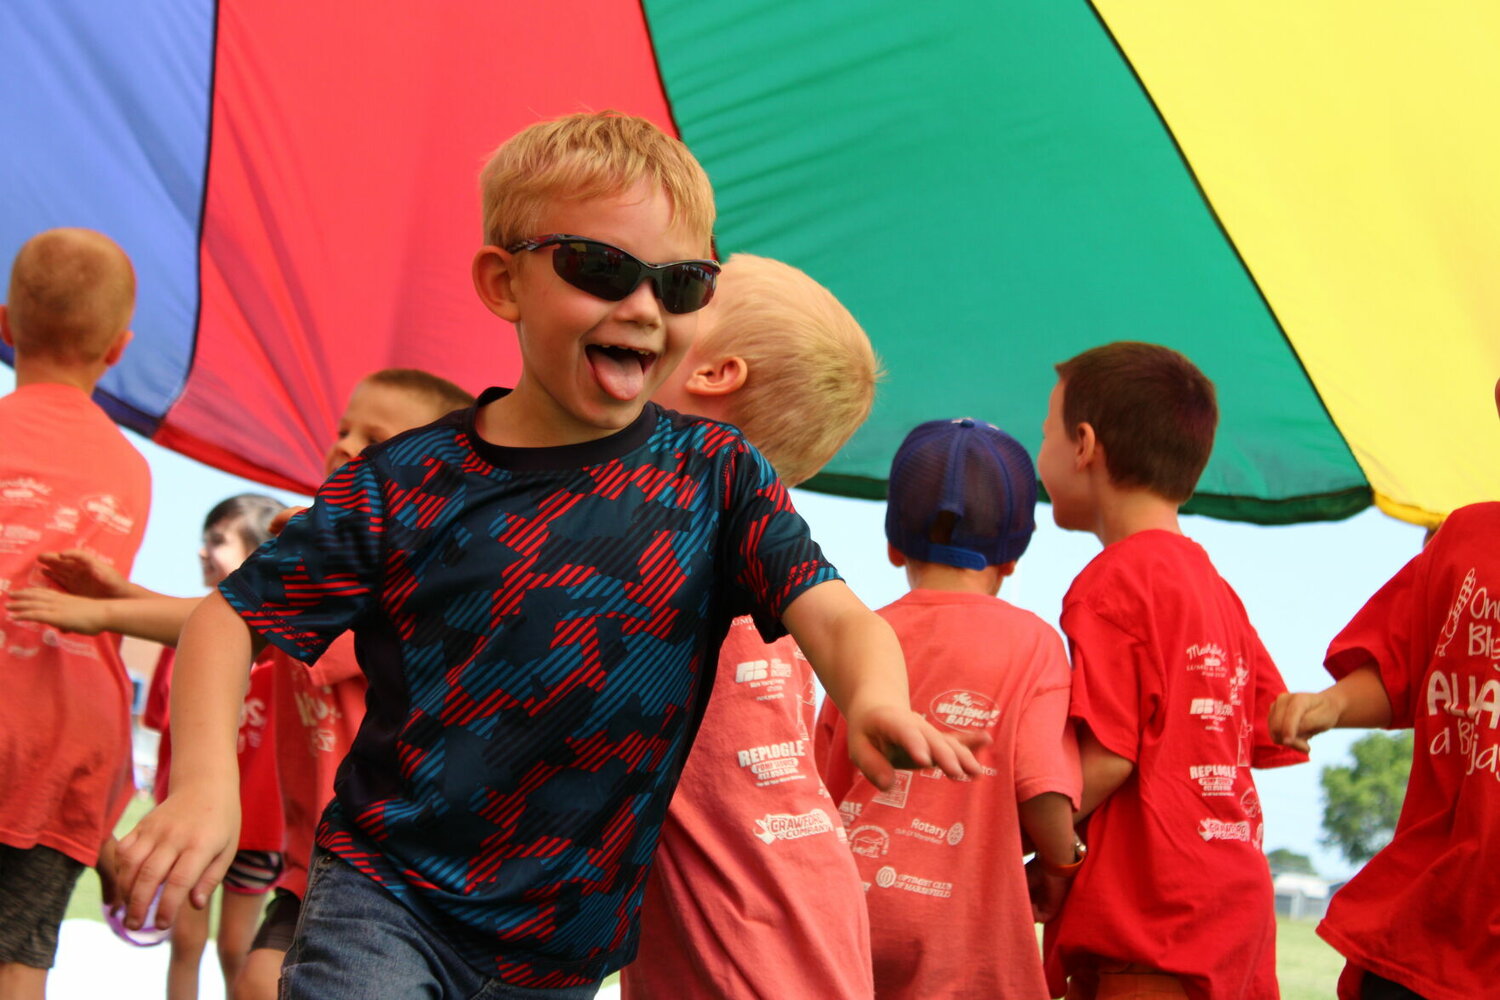 Shades on and smiling! A long-time favorite of Field Day is the rainbow parachute exercises led by Coach Athena Neptune.